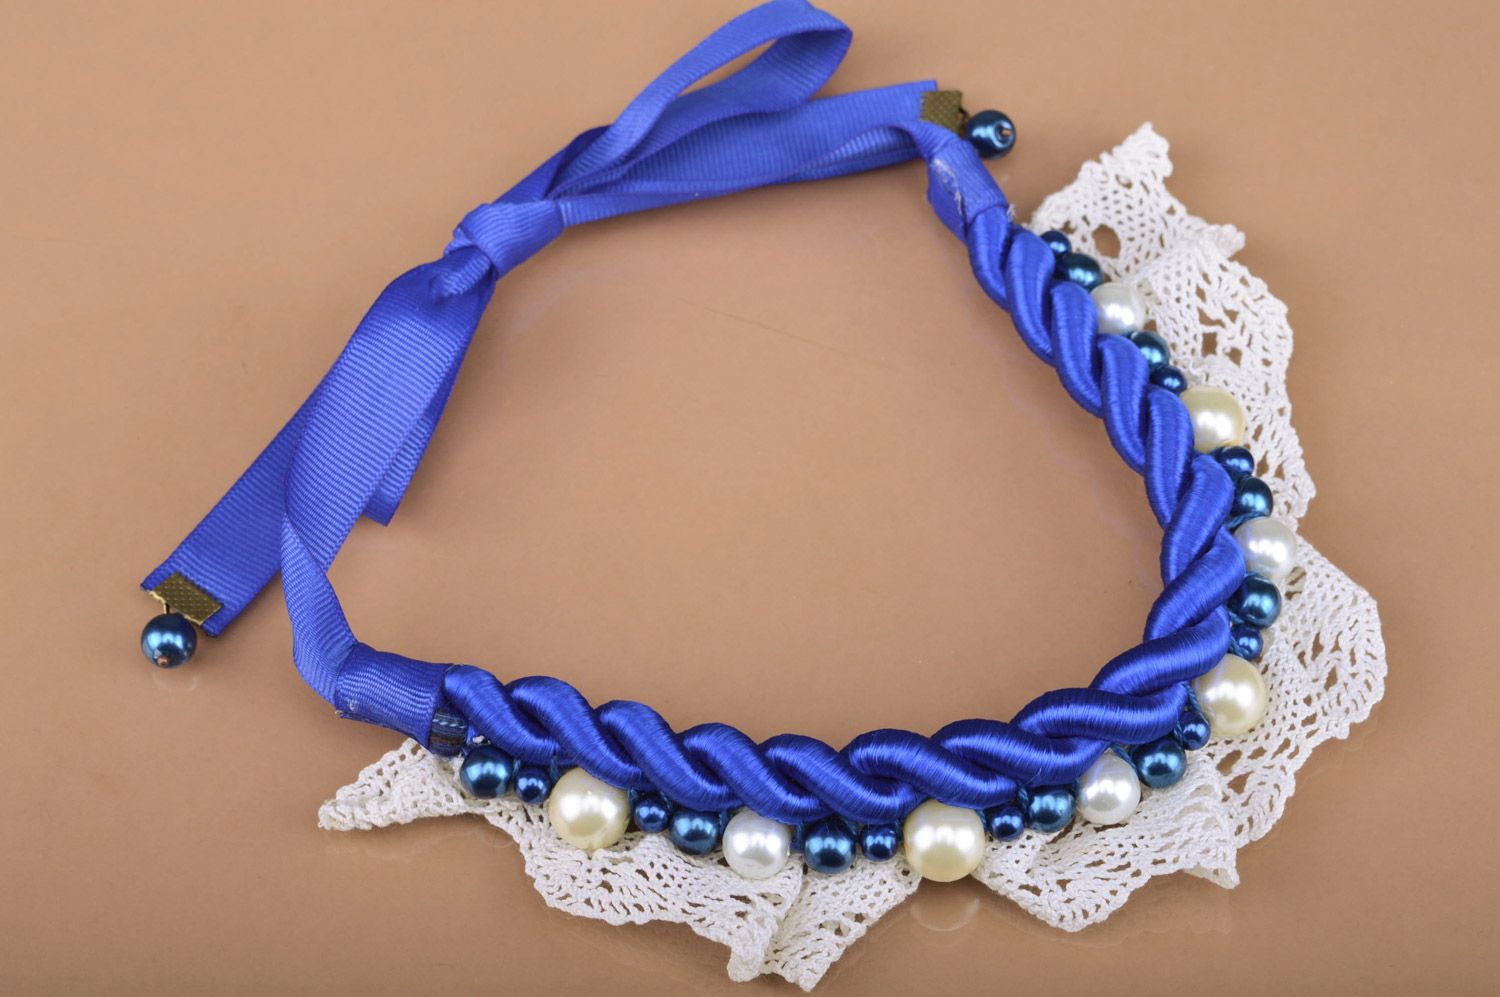 Handmade festive collar necklace with beads and lace in blue and white colors  photo 1